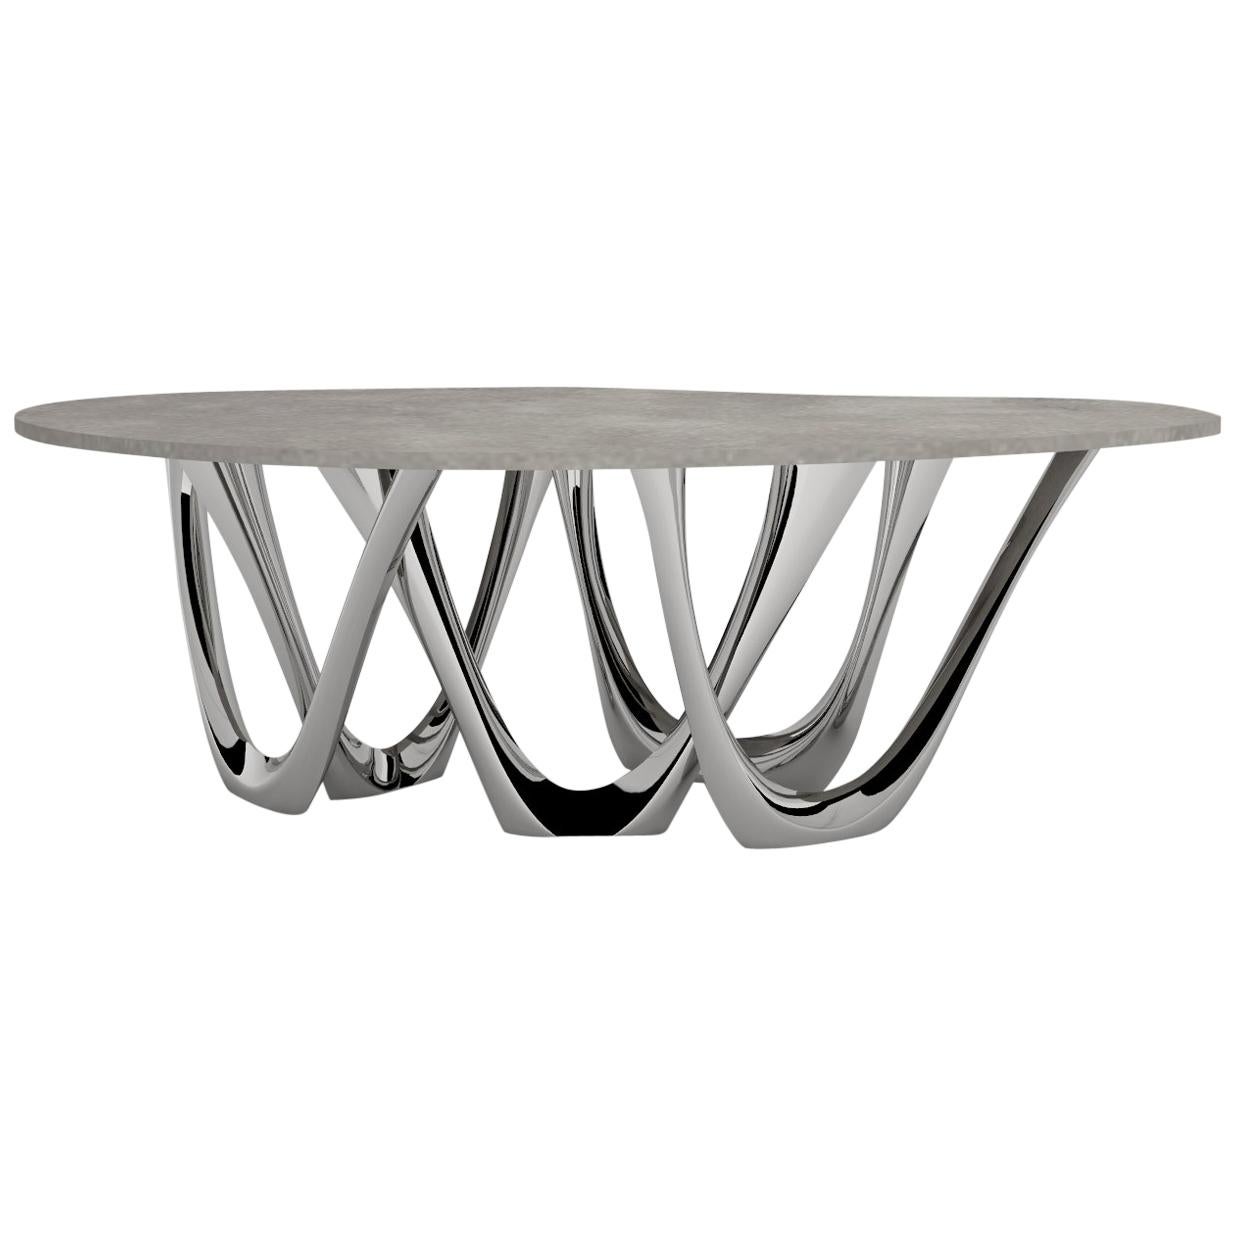 G-Table B and C in Polished Stainless Steel with Concrete Top by Zieta